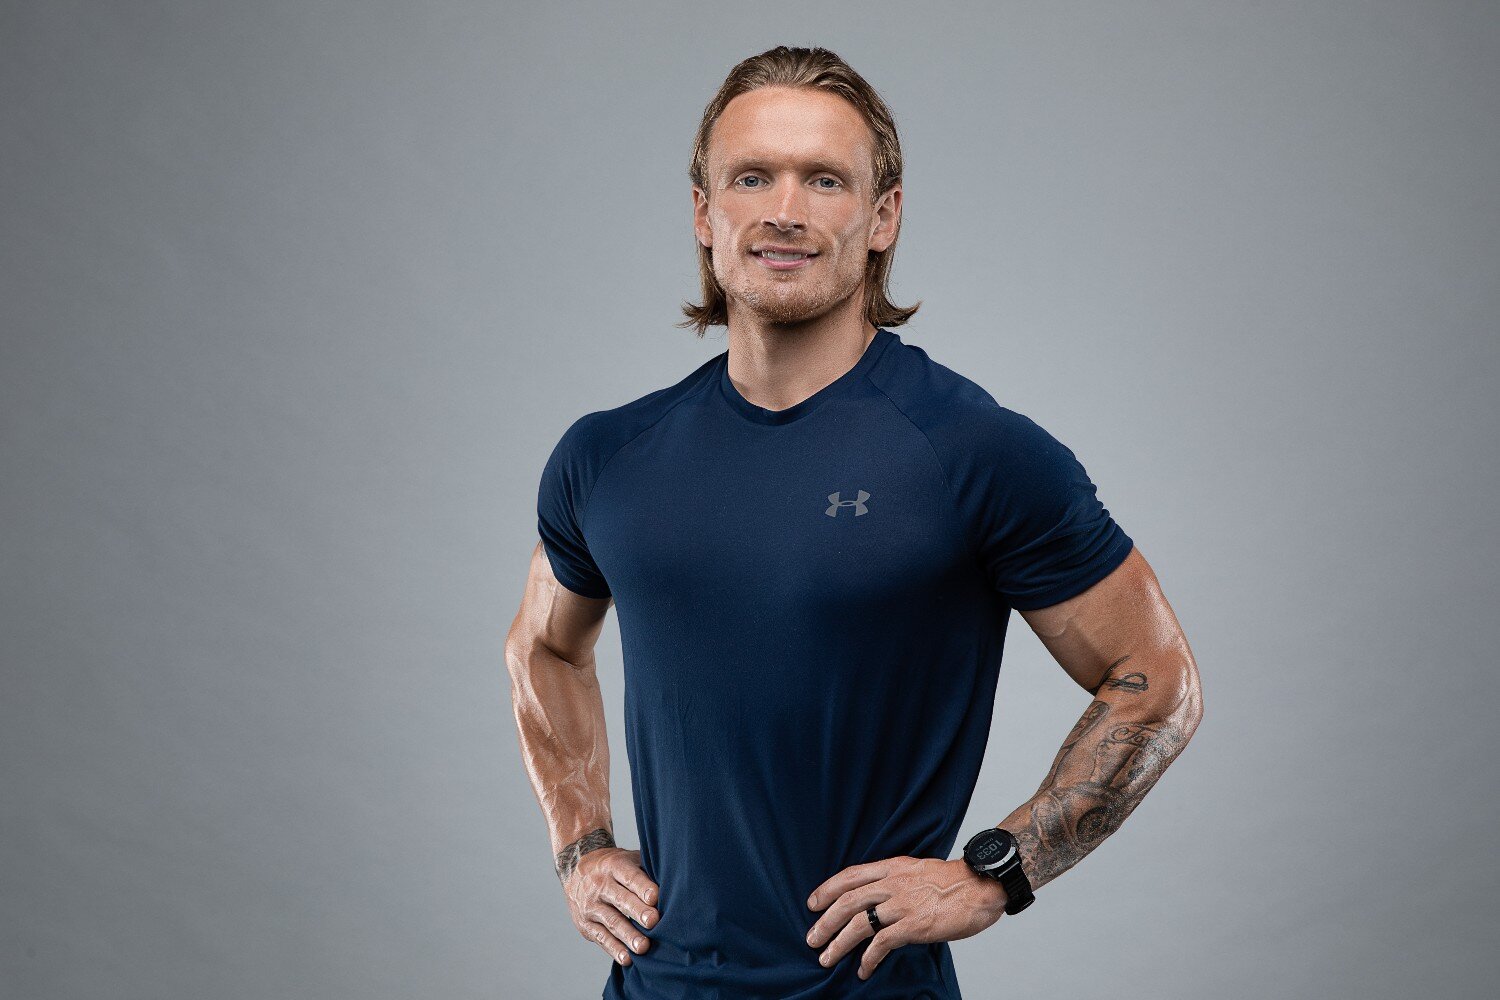 Online Personal Trainer  Online Fitness Coach UK - Andy Griffiths